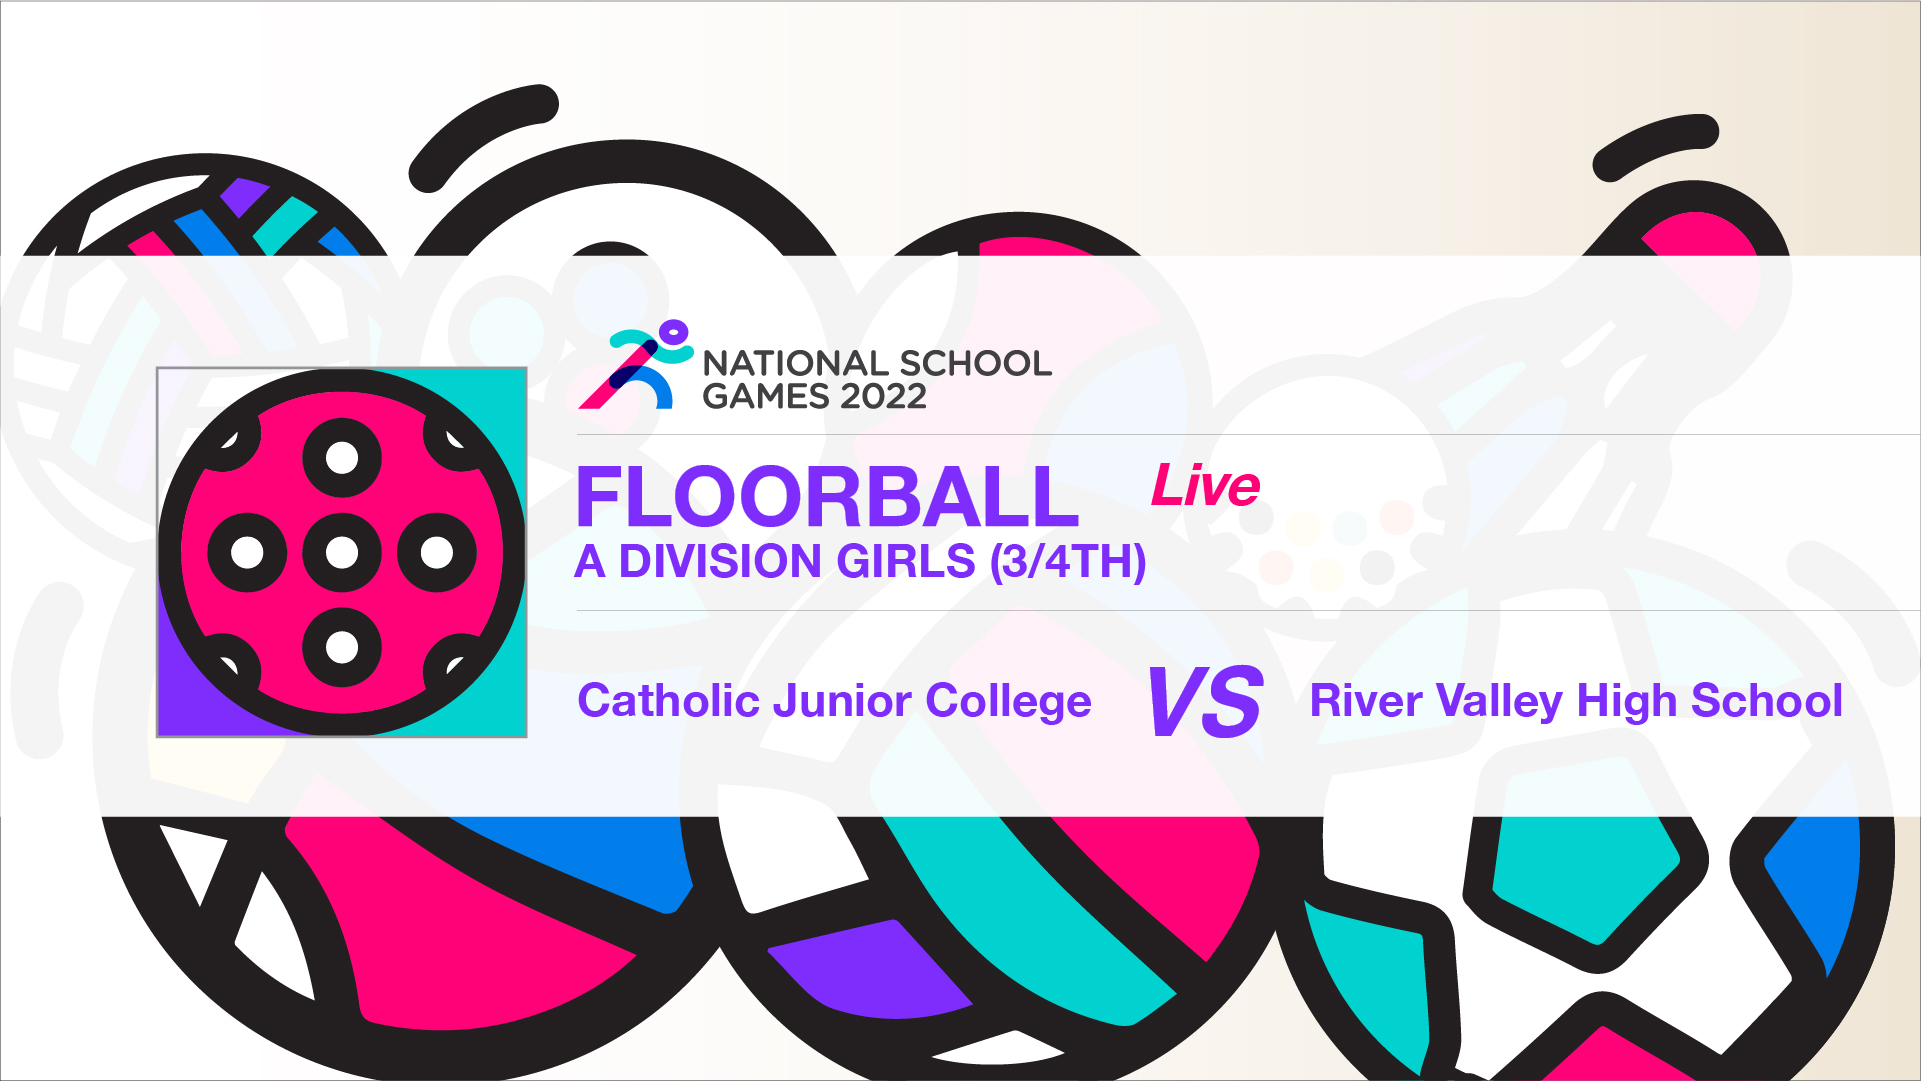 SSSC Floorball A Division Girls (3/4th) | Catholic Junior College vs River Valley High School